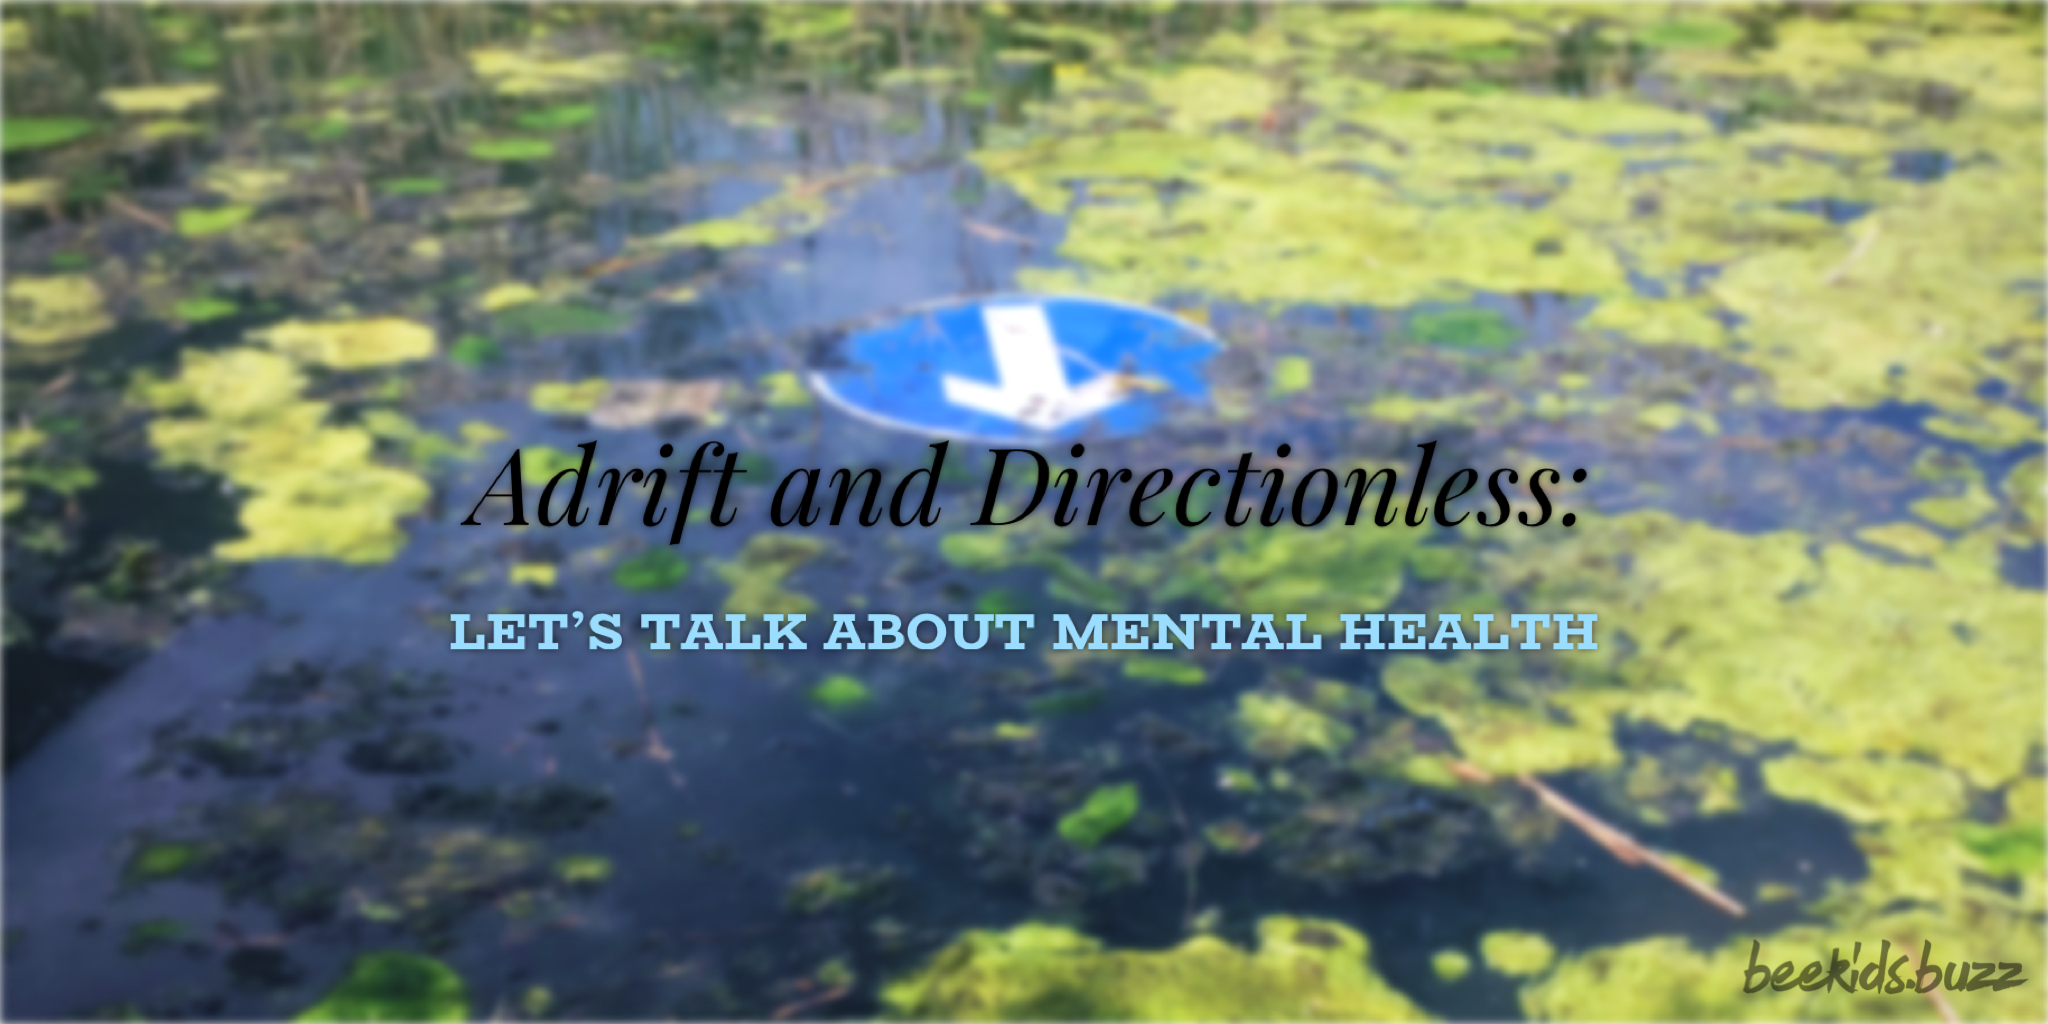 Adrift and Directionless: Let’s Talk About Mental Health.